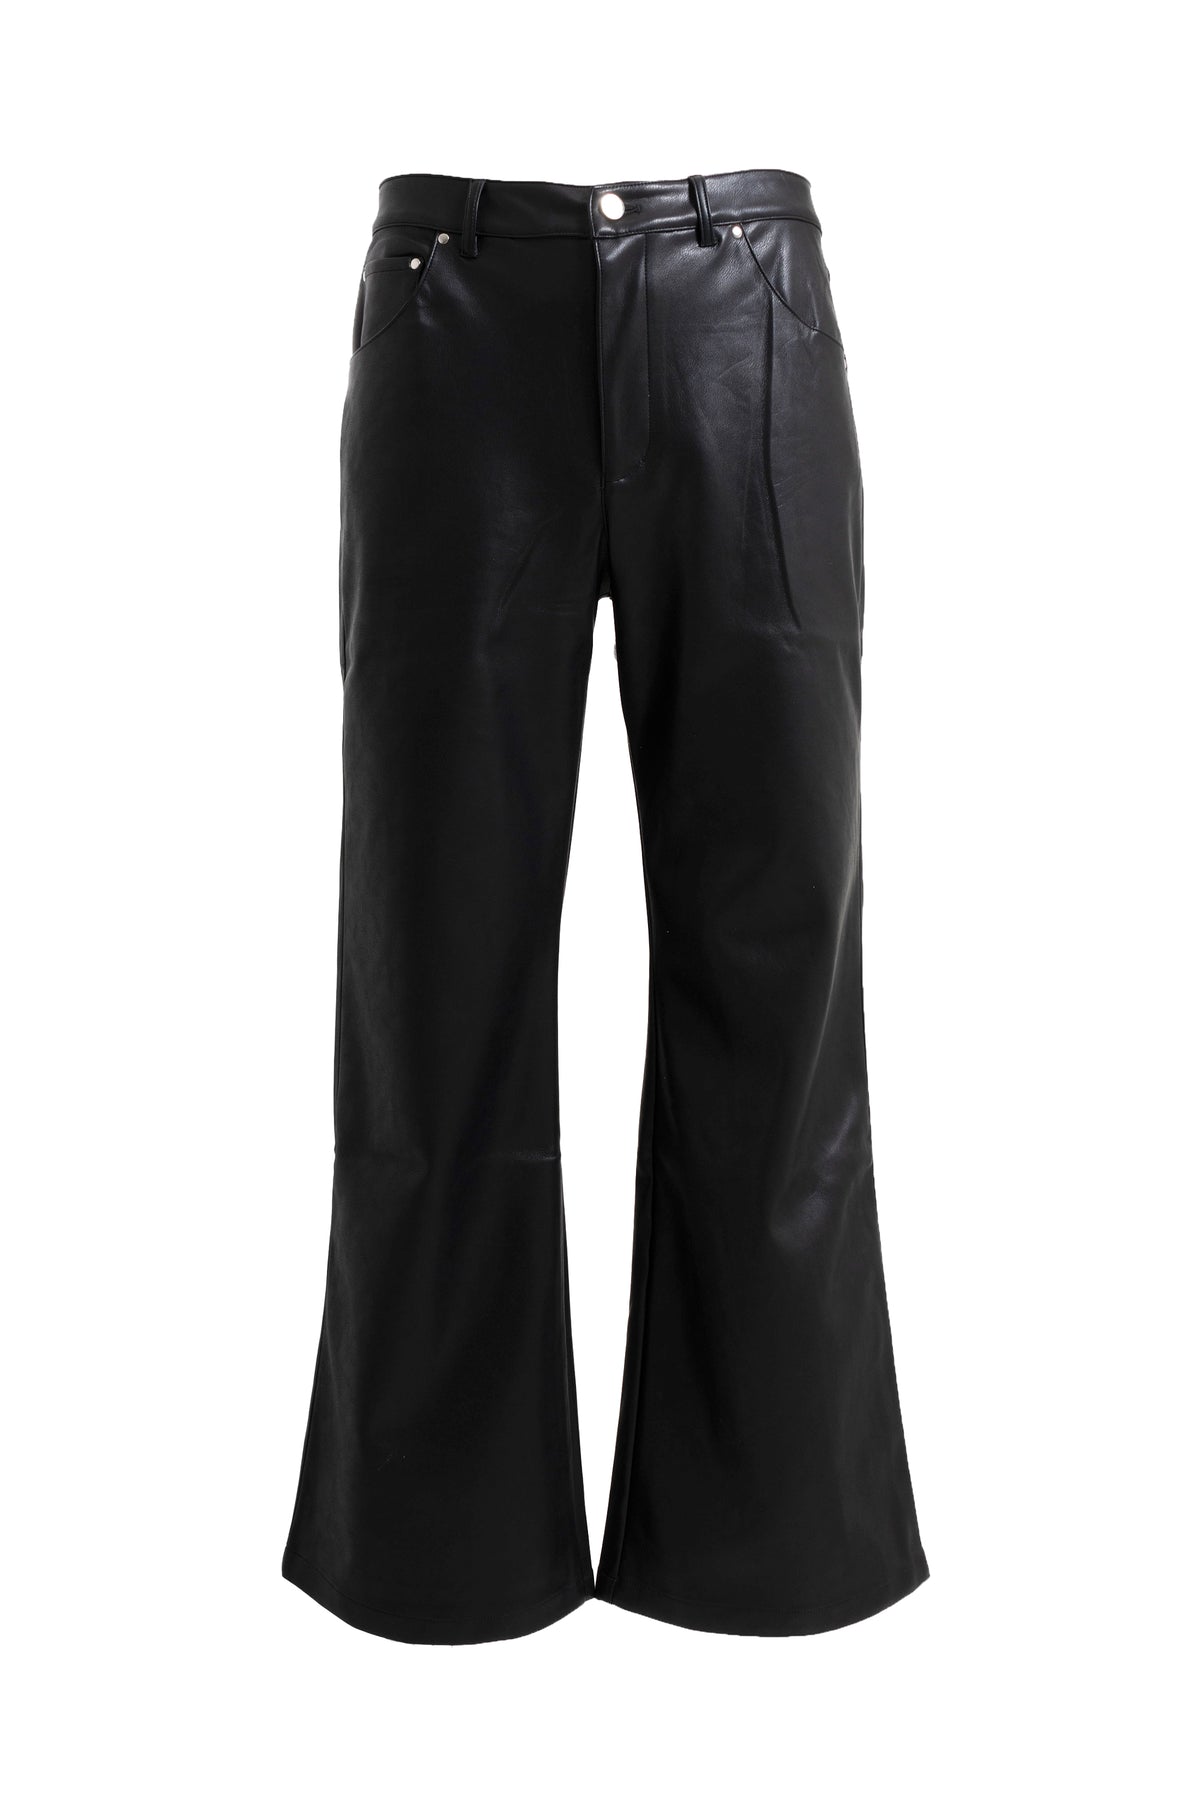 LEATHER WIDE PANTS / BLK